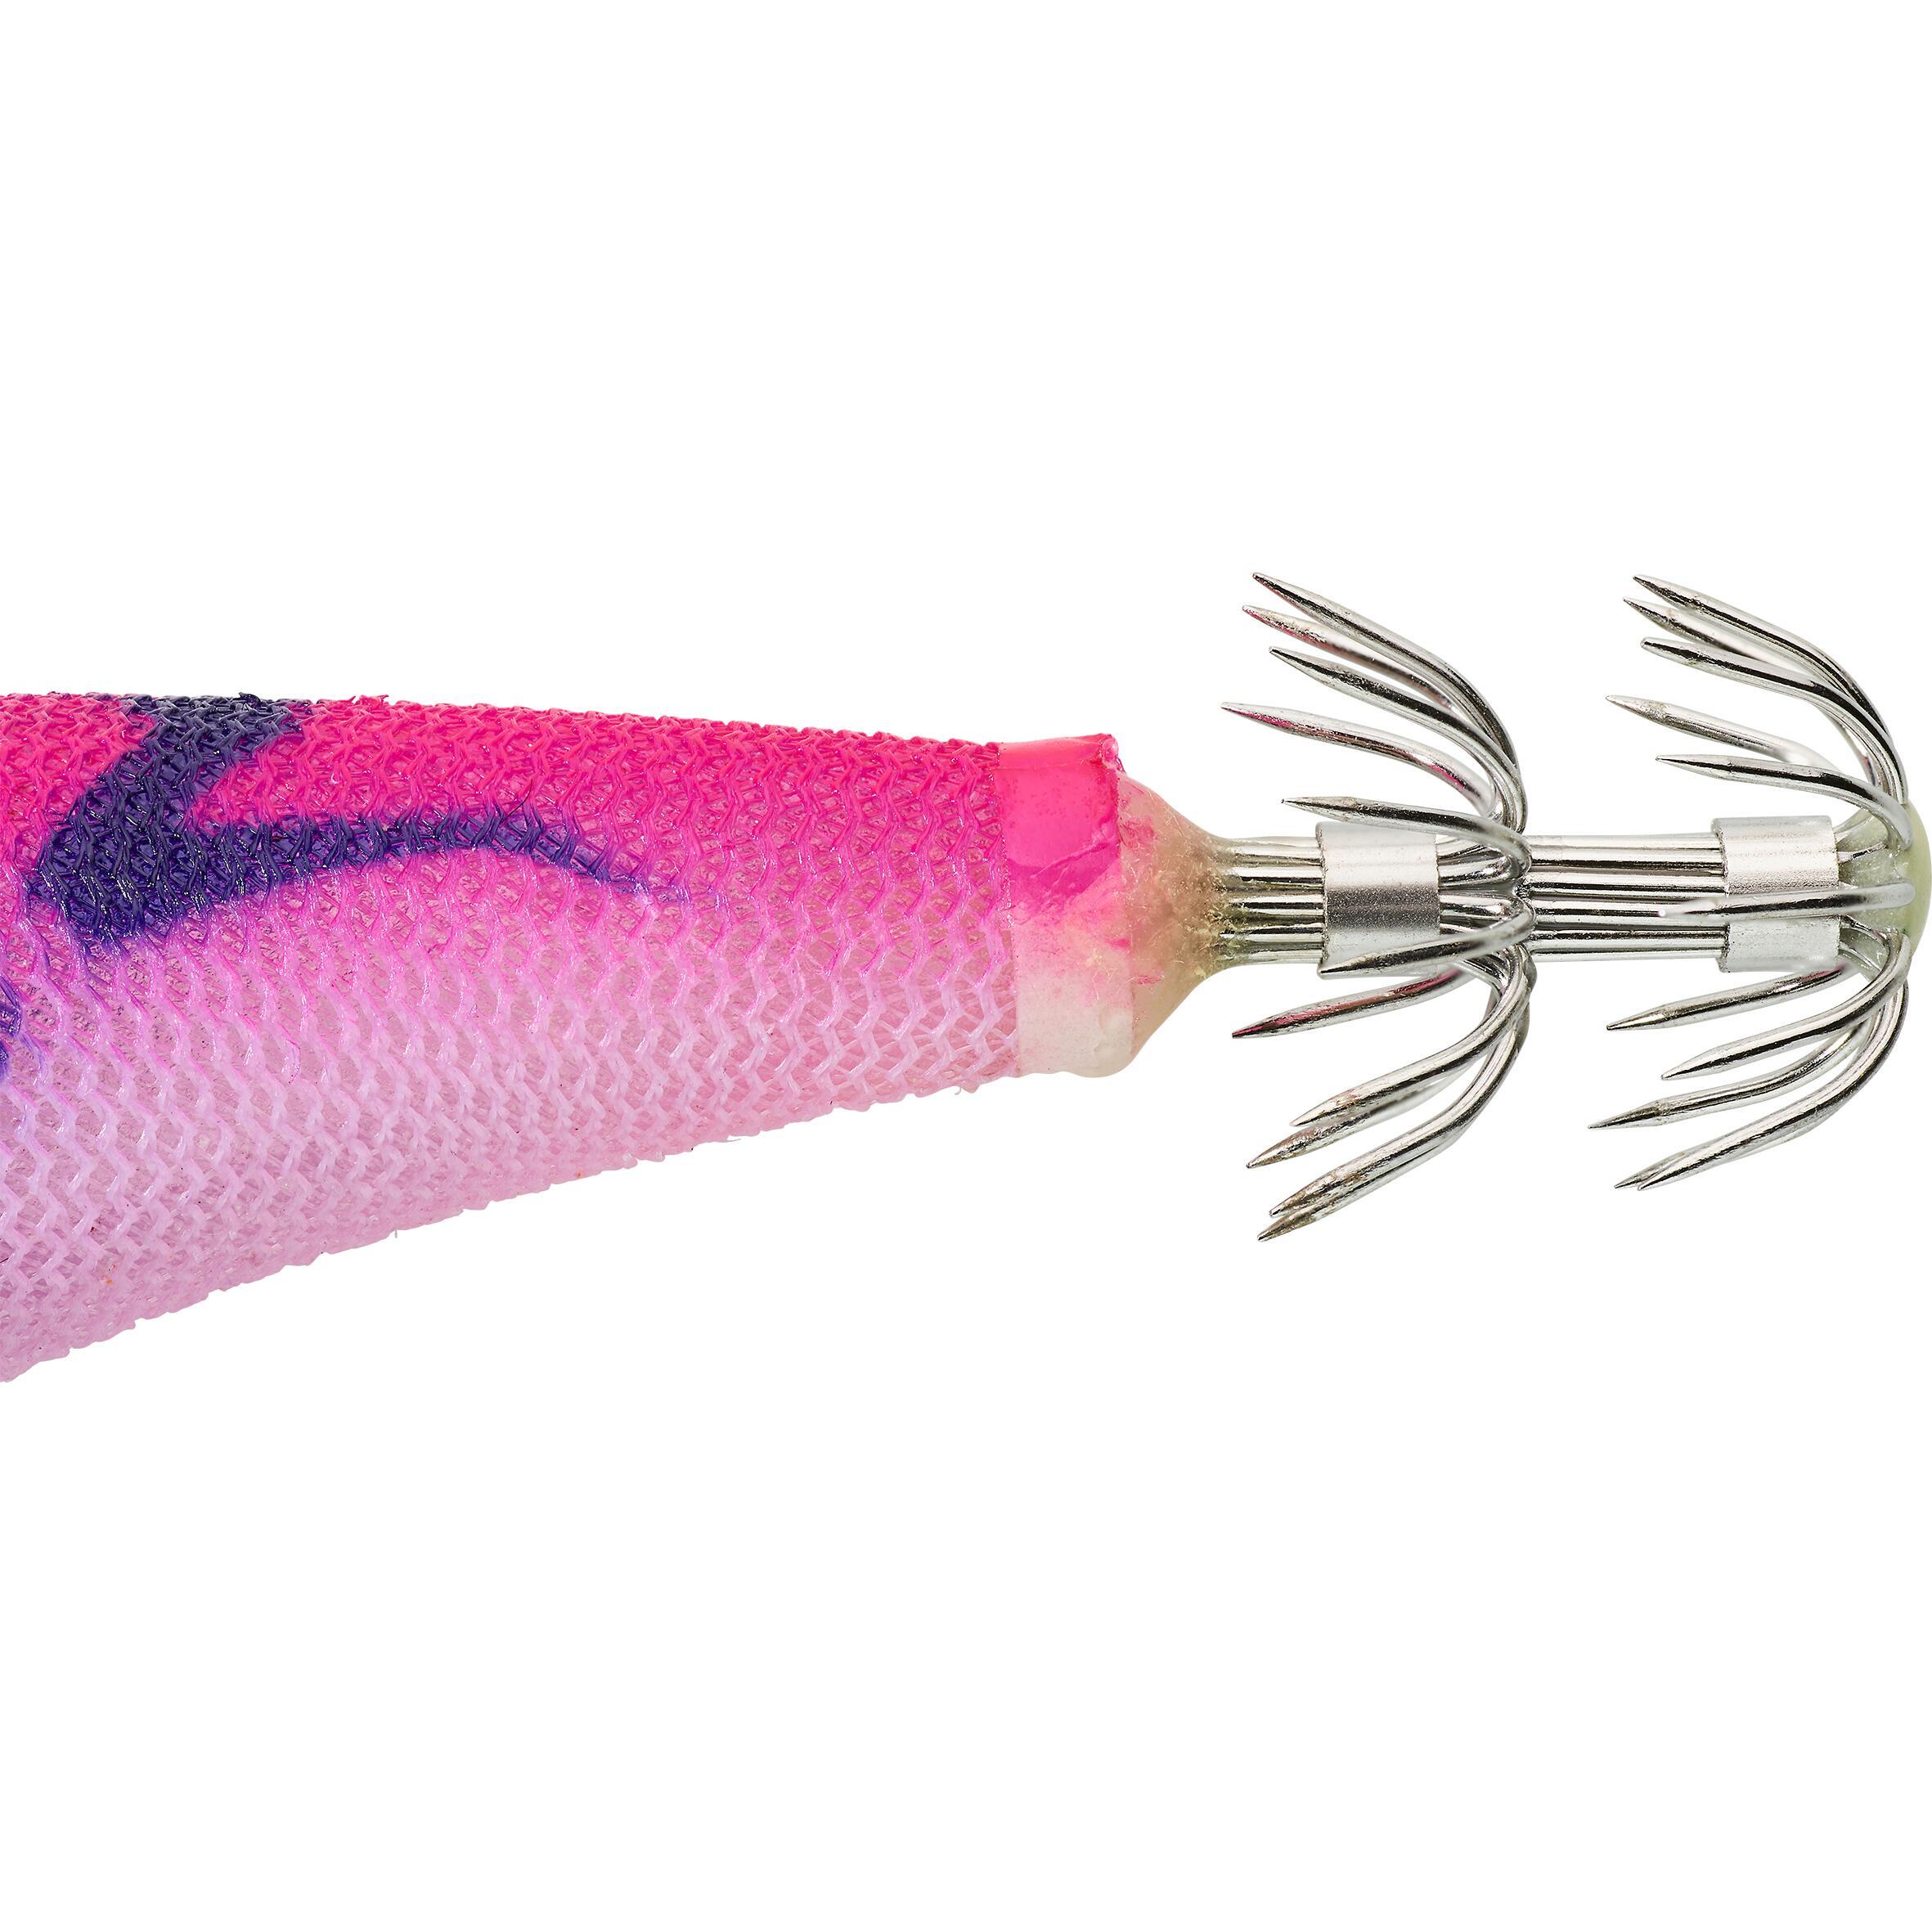 Sea fishing for cuttlefish and squid sinking jig EBI S 2.5 Neon pink 3/3